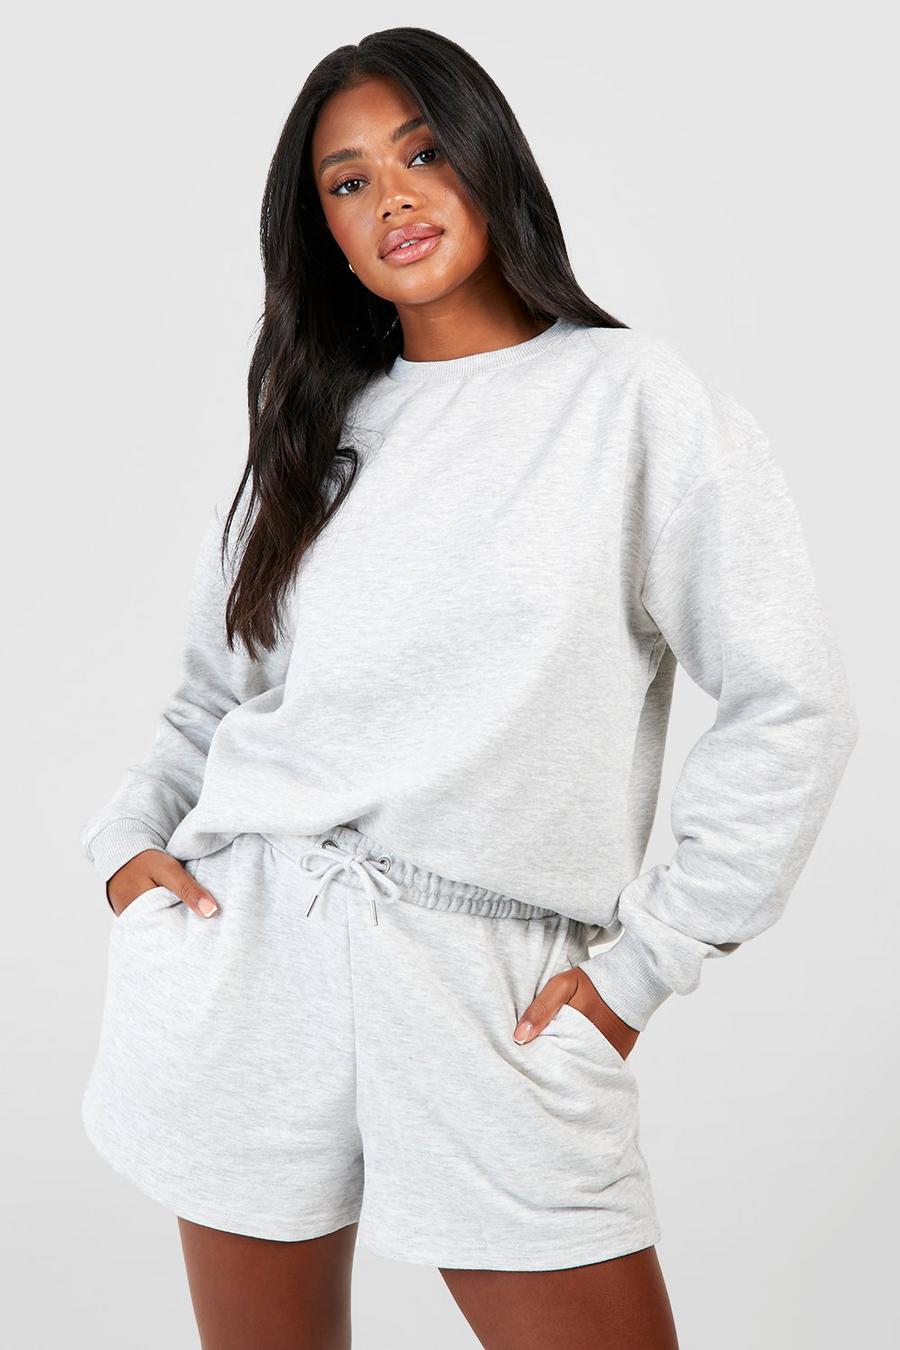 Ash grey Sweater Short Tracksuit With Reel Cotton